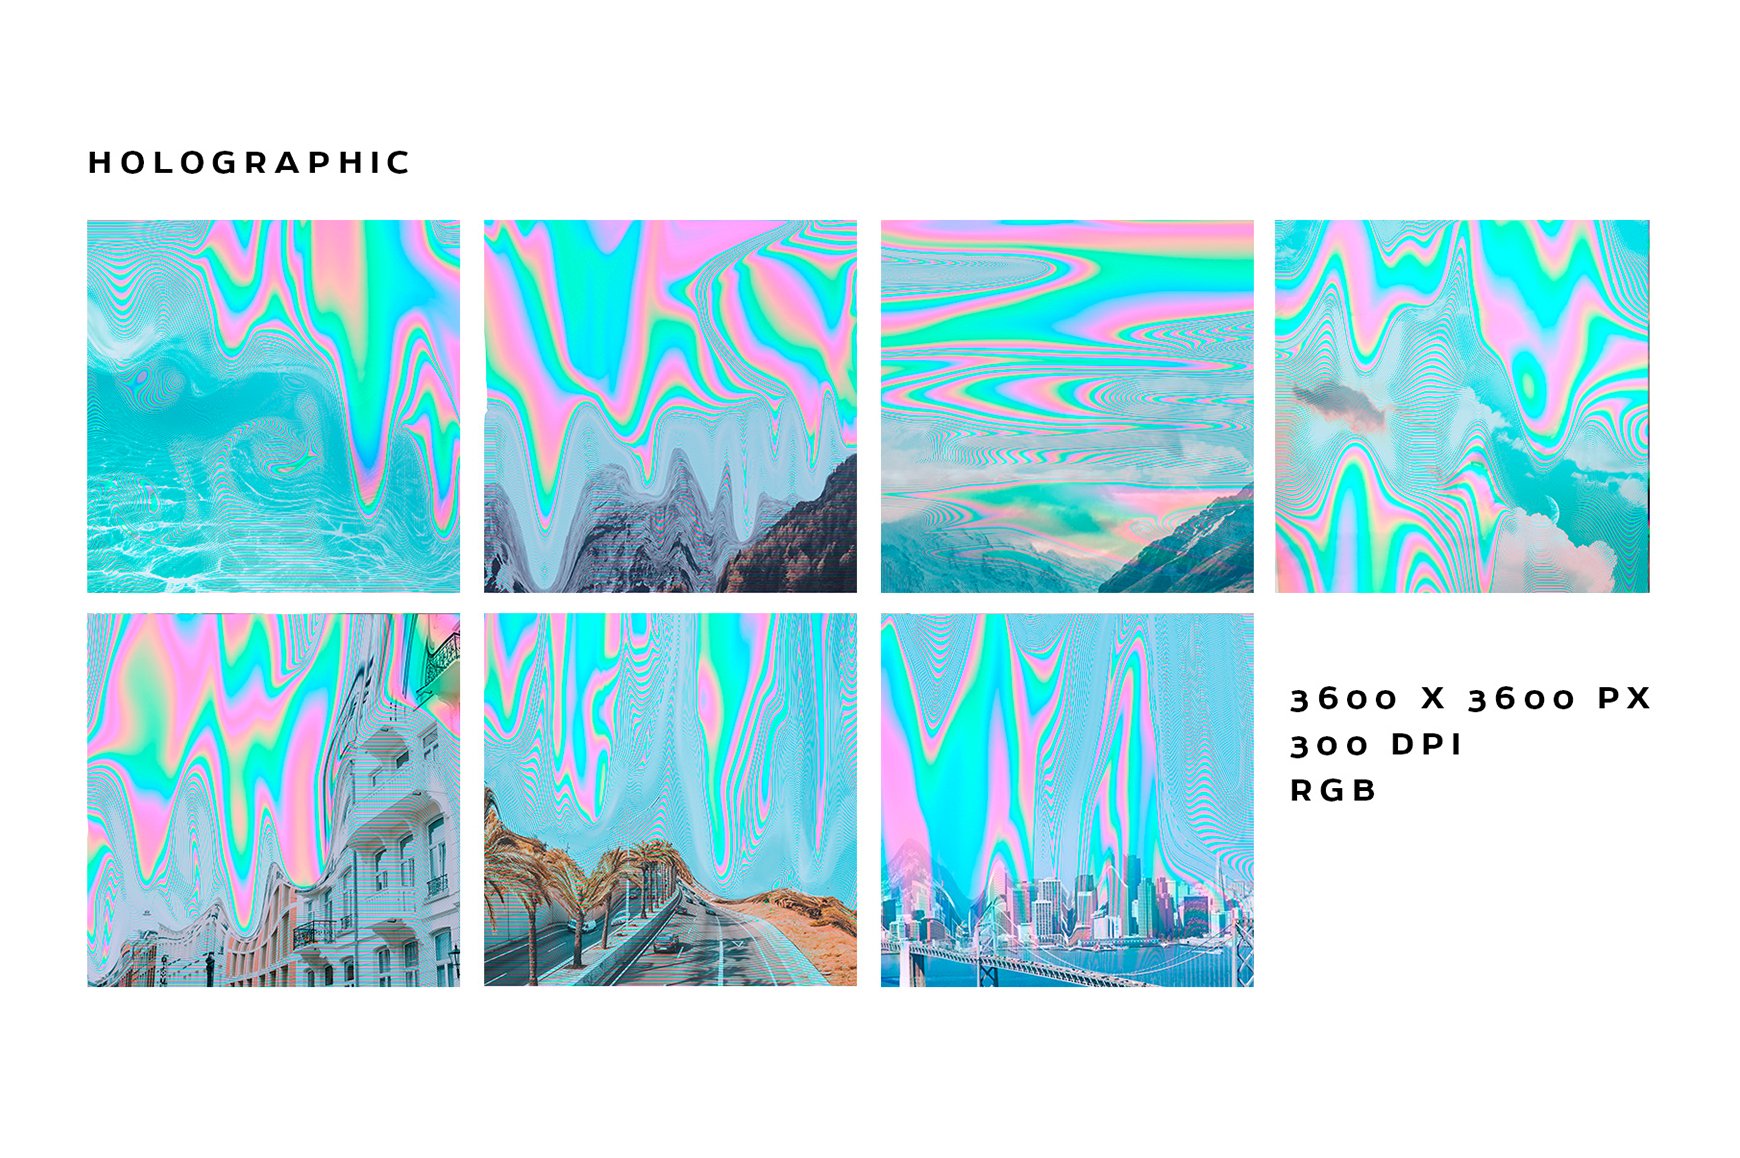 Holographic Glitch Abstract Textures